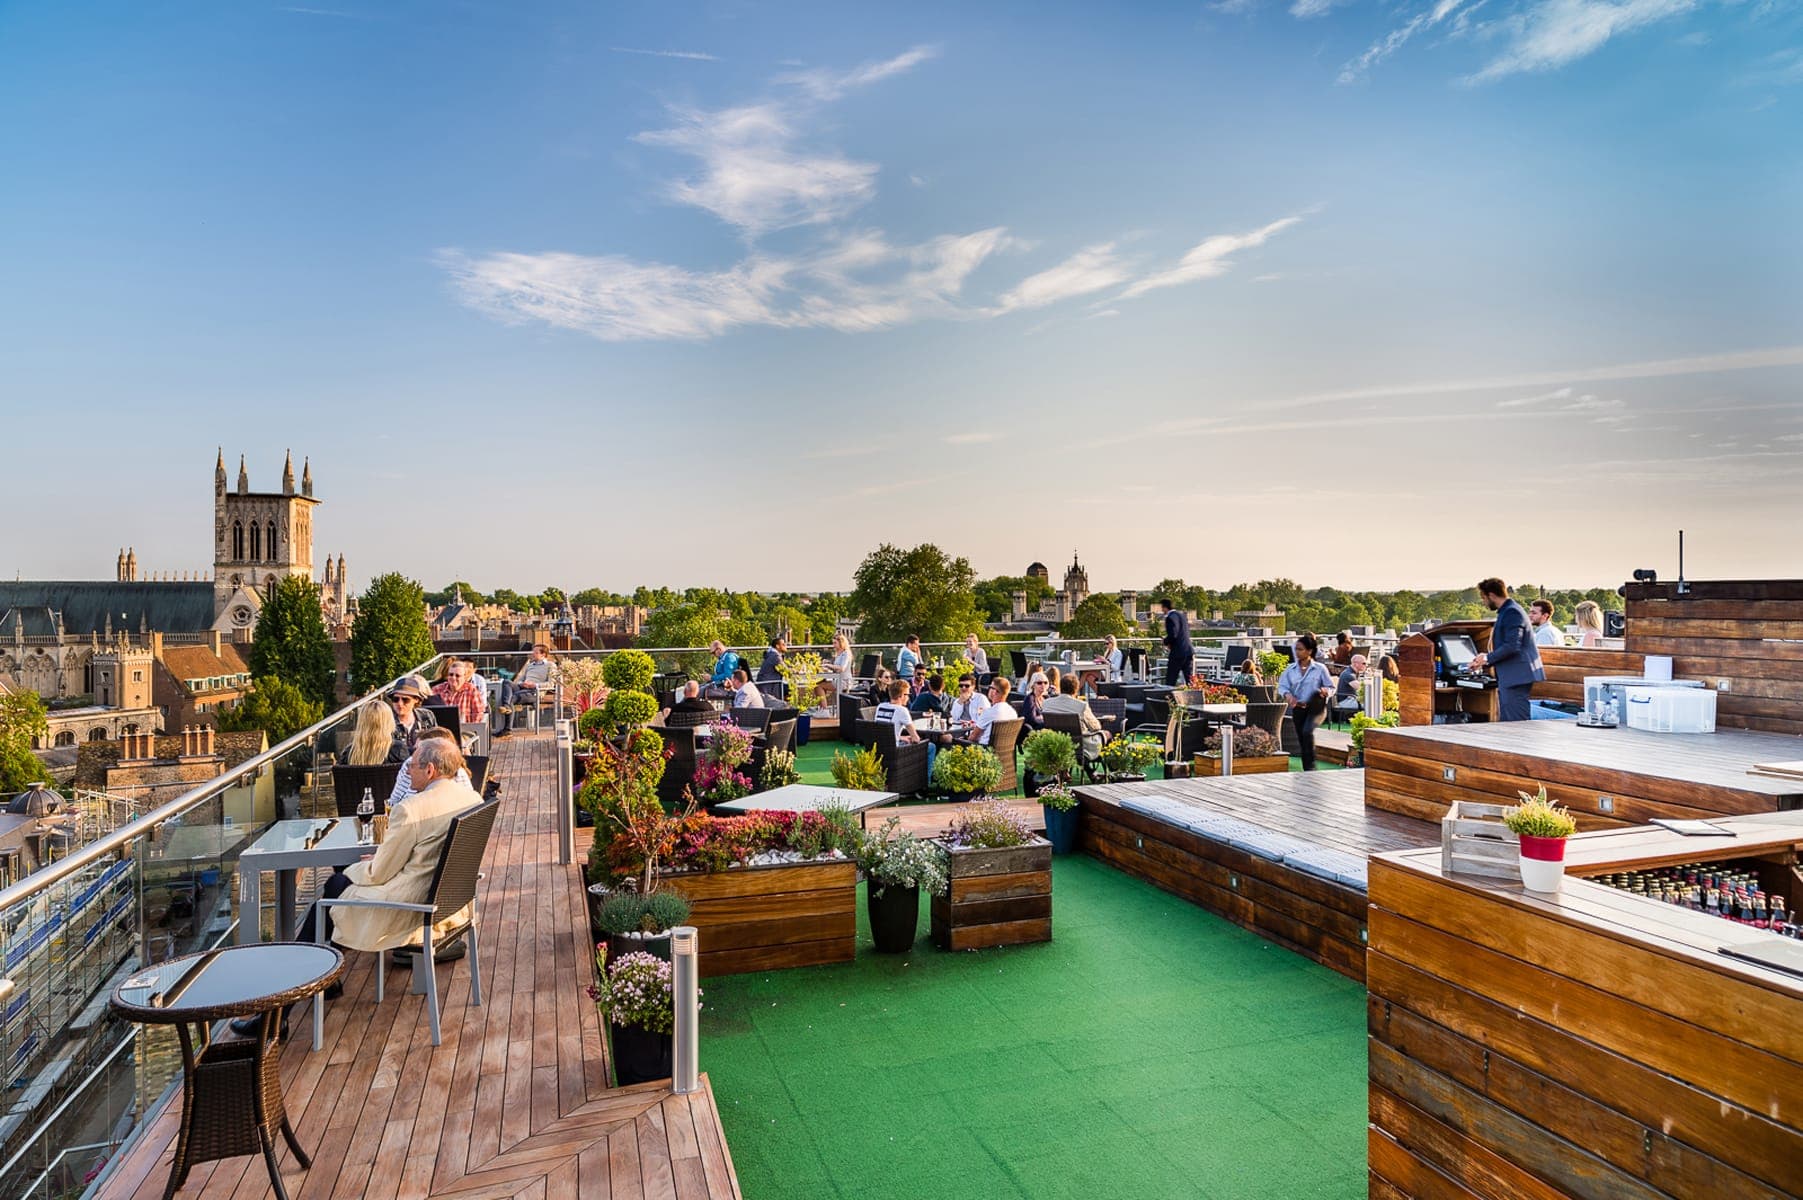 Rooftop bar in Central Cambridge